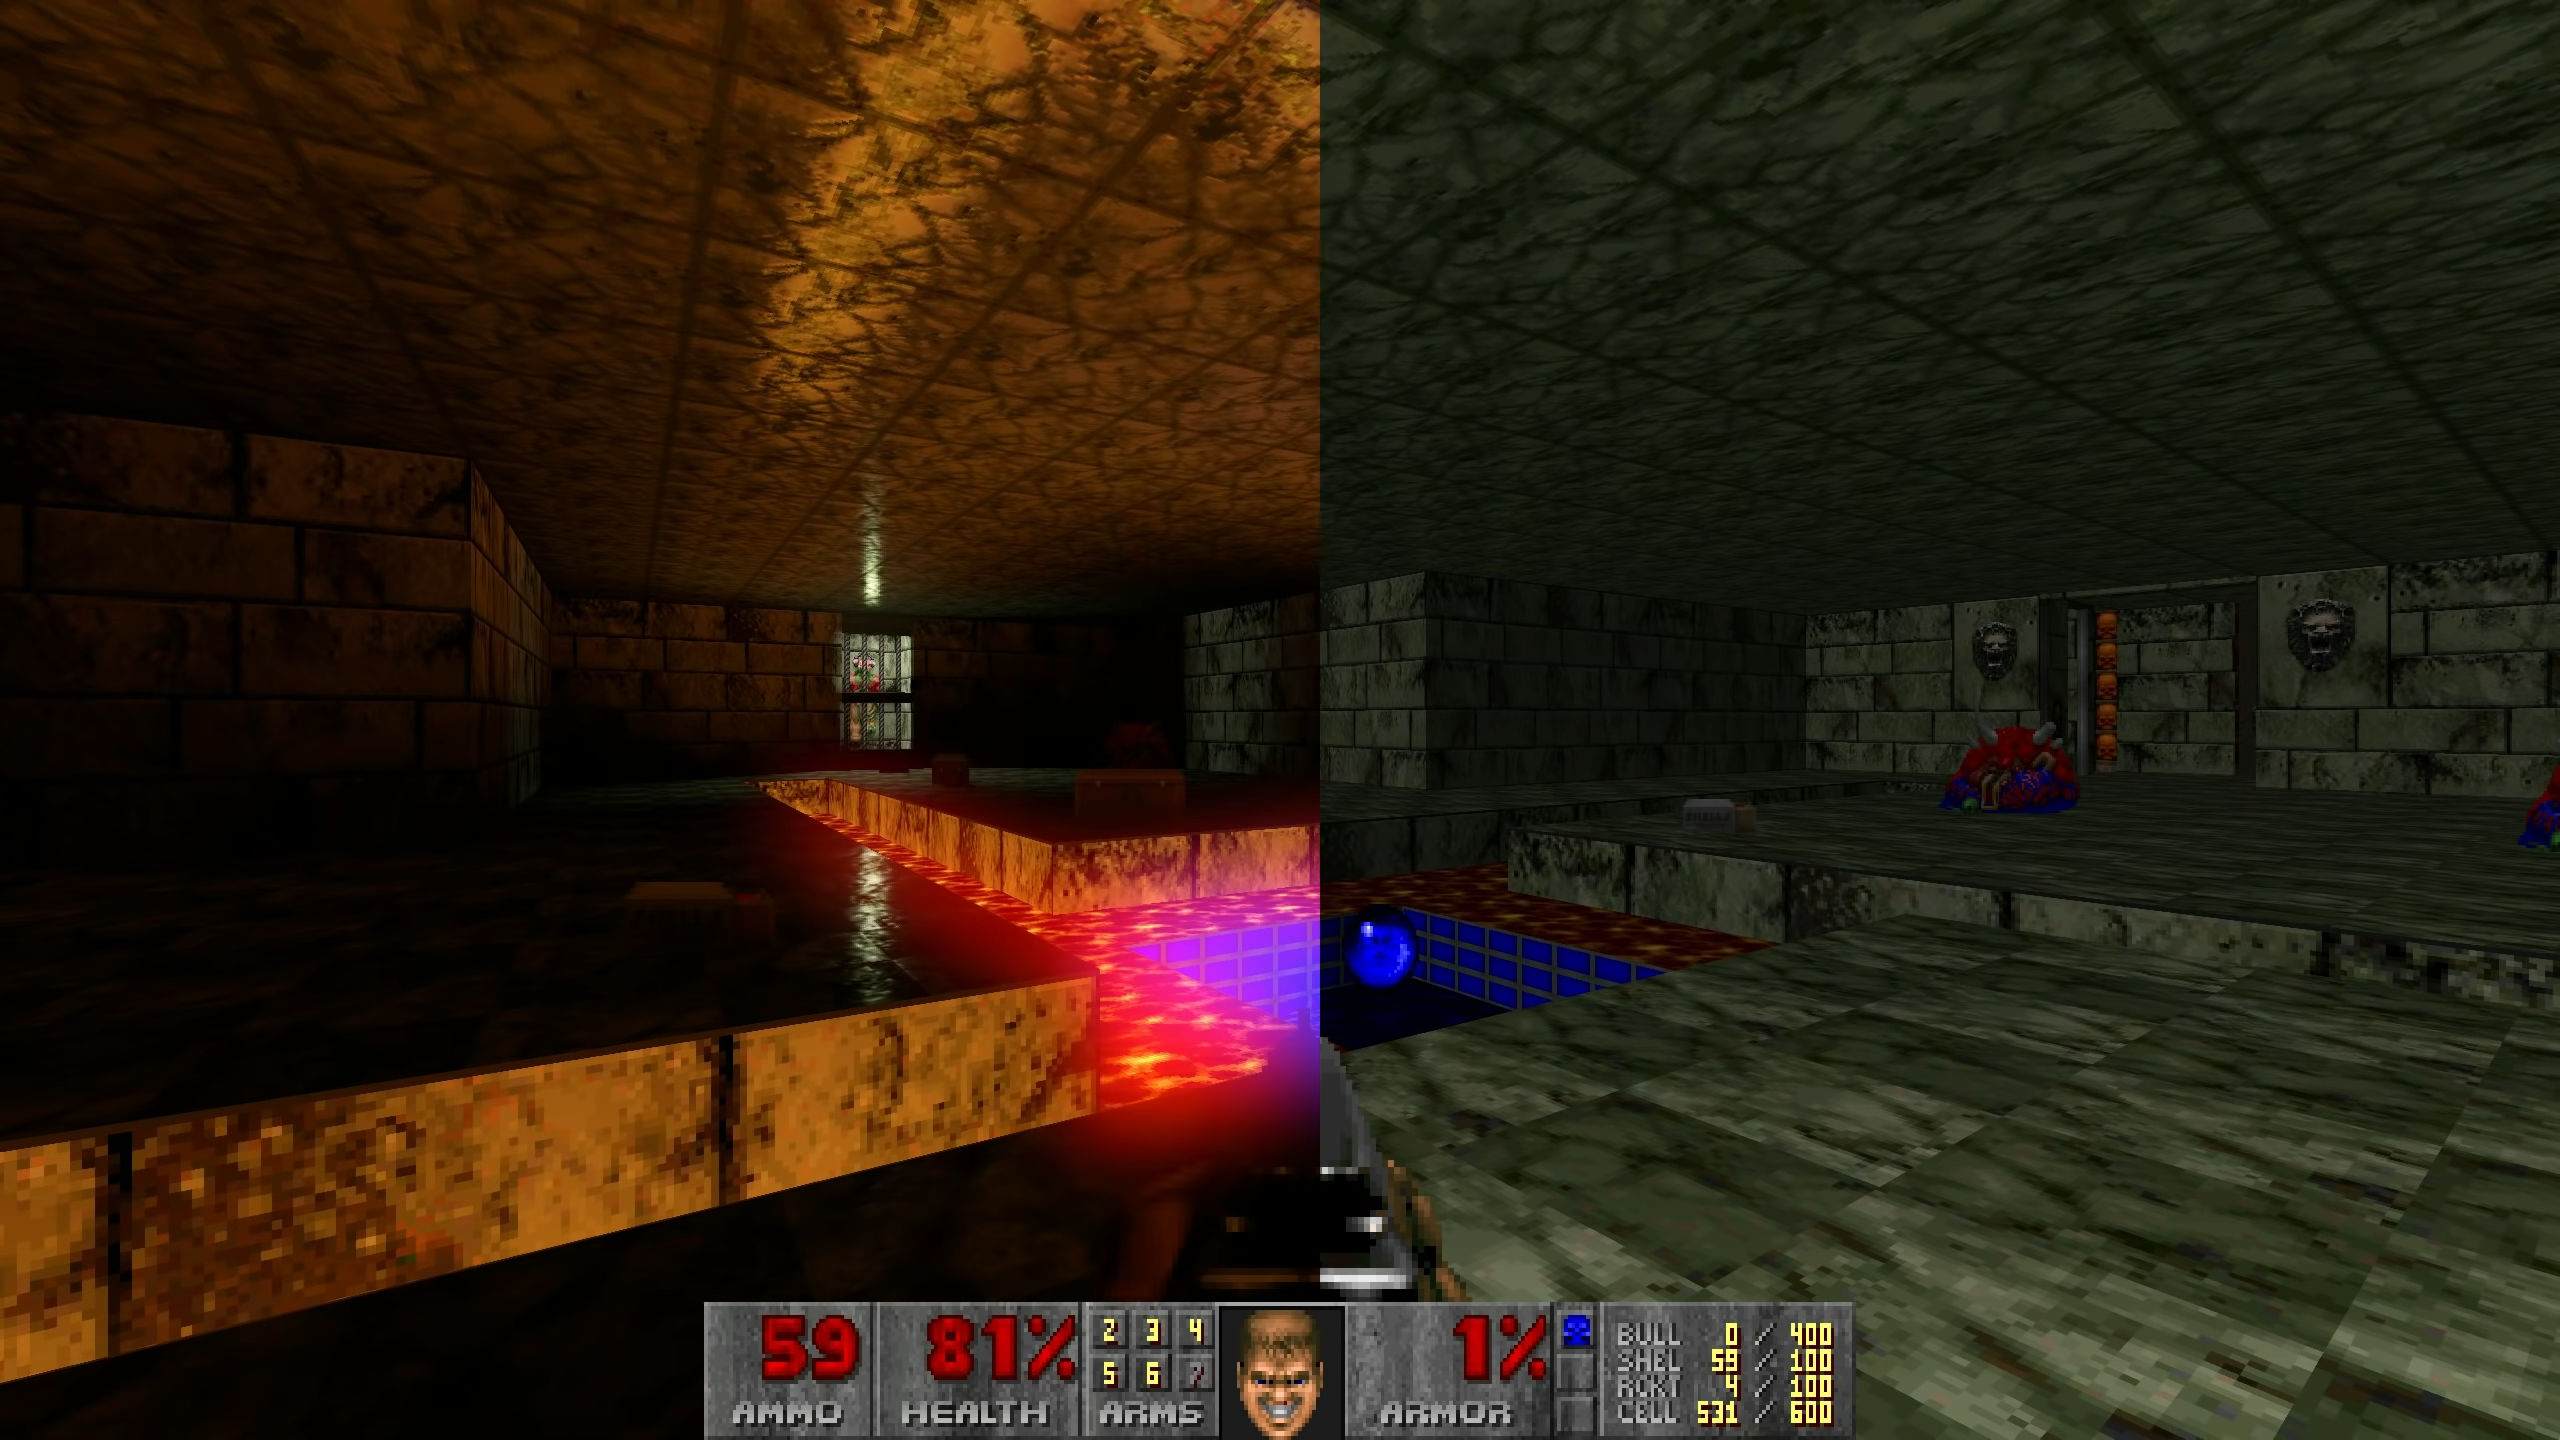 Doom: Ray Traced" mod enables in almost 30 old classic FPS - VideoCardz.com